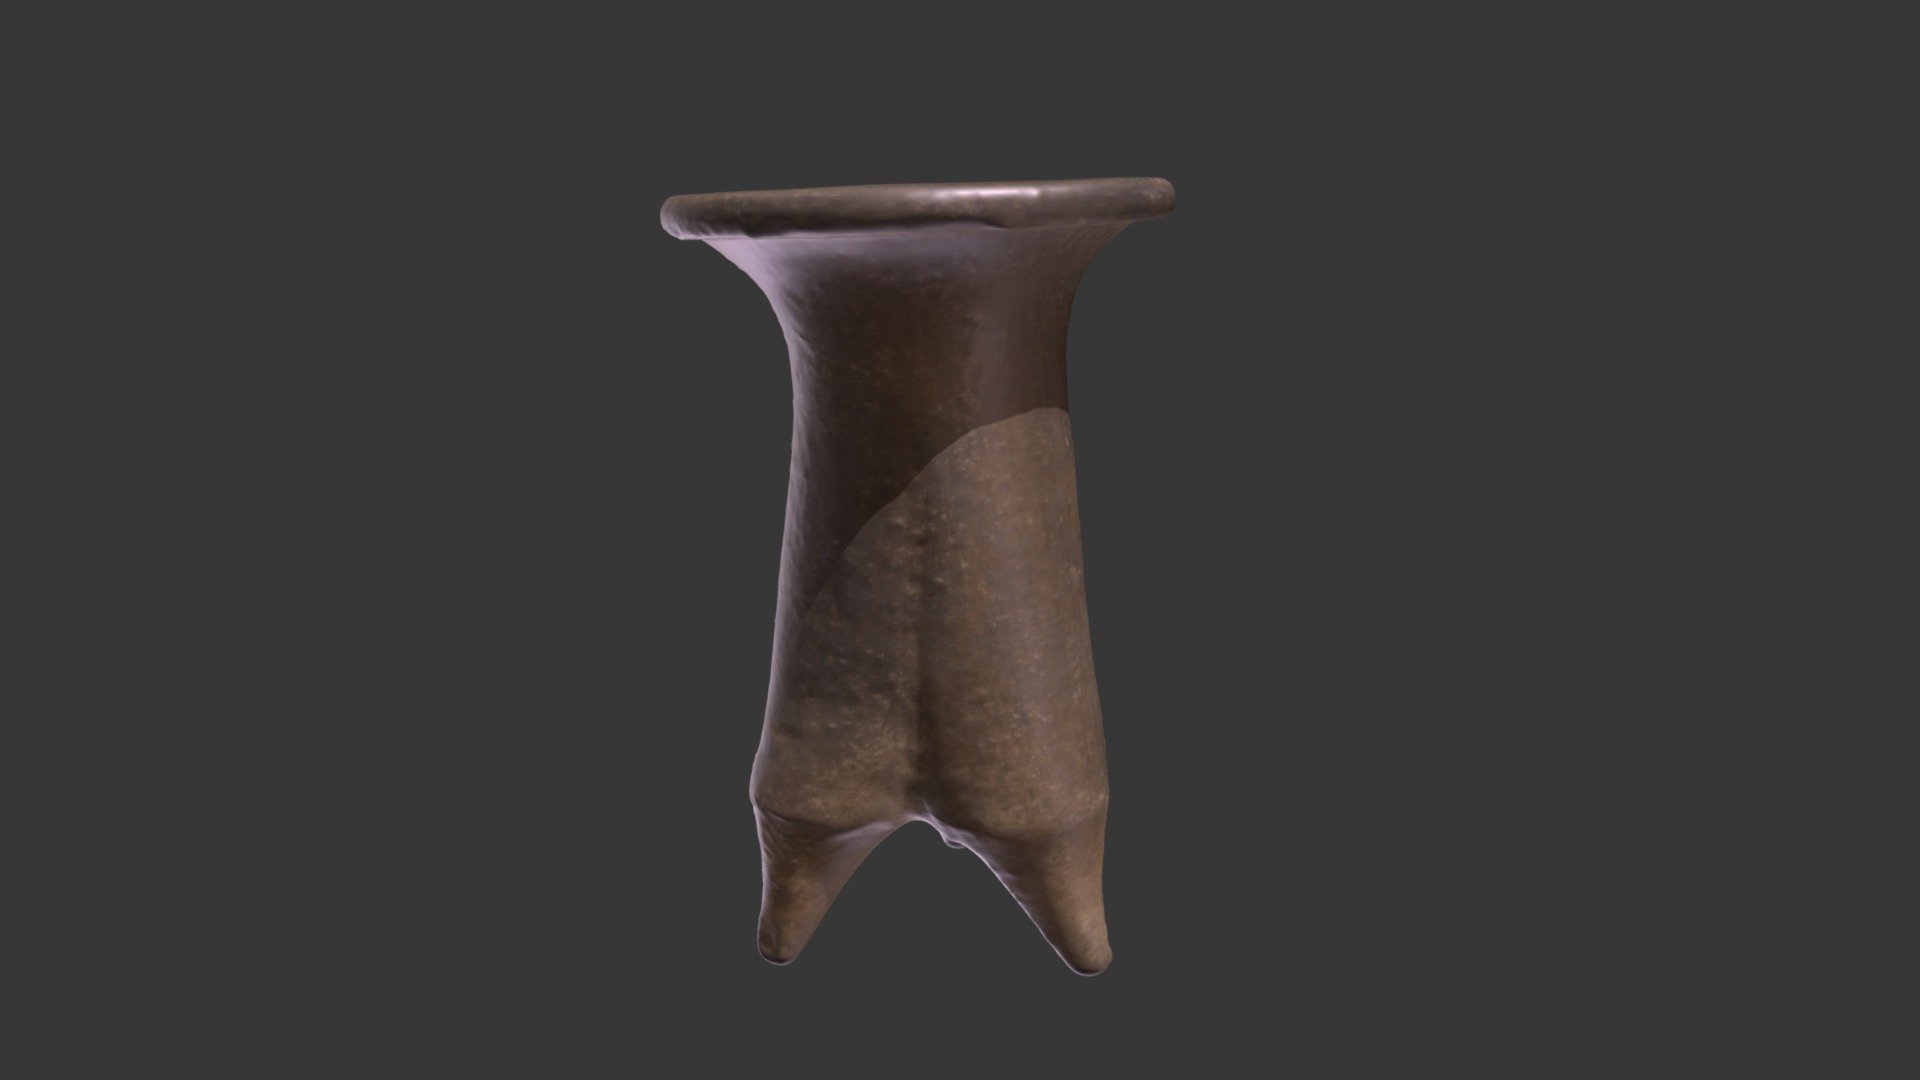 World Origin: East Asia / Country of Origin: China-Inner Mongolia or Liaoning Province / Artist: Chinese / Culture Group: Lower Xiajiadian / Medium: Ceramic / Date: 2100-1500 BC / Height: 11 (in) / Width: 0 (in) / Depth: 0 (in)

3D scanned using Artect Spider Processed using Artec Studio Professional and Geomagic Wrap

This object is part of the Cravens Collection owned by University at Buffalo Art Galleries. It was digitized with equipment owned by the University of South Florida, as part of the Cravens Virtual Museum Project directed by Dr. Laura Harrison 3d model